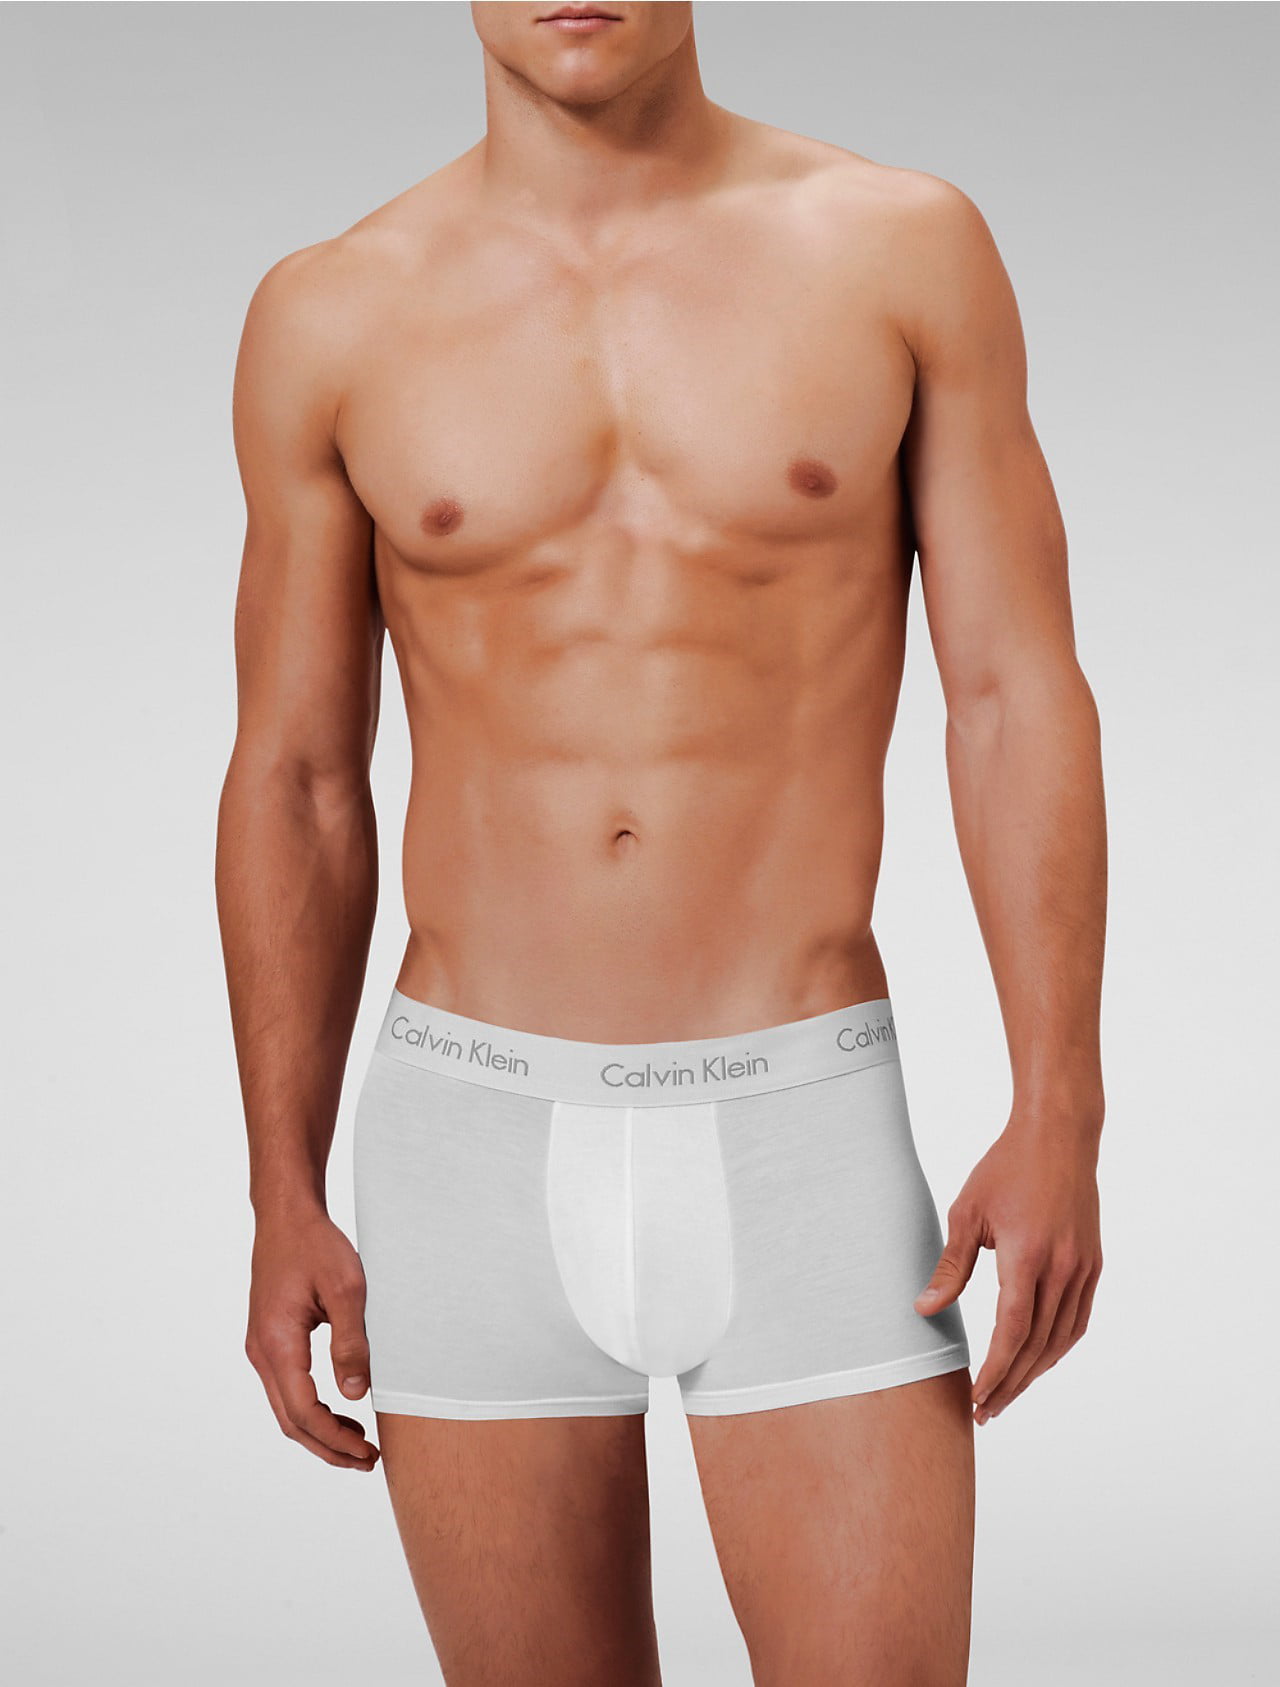 Oxwhite Men Modal Cotton Trunk 2 in 1 Pack - Size S to 3XL